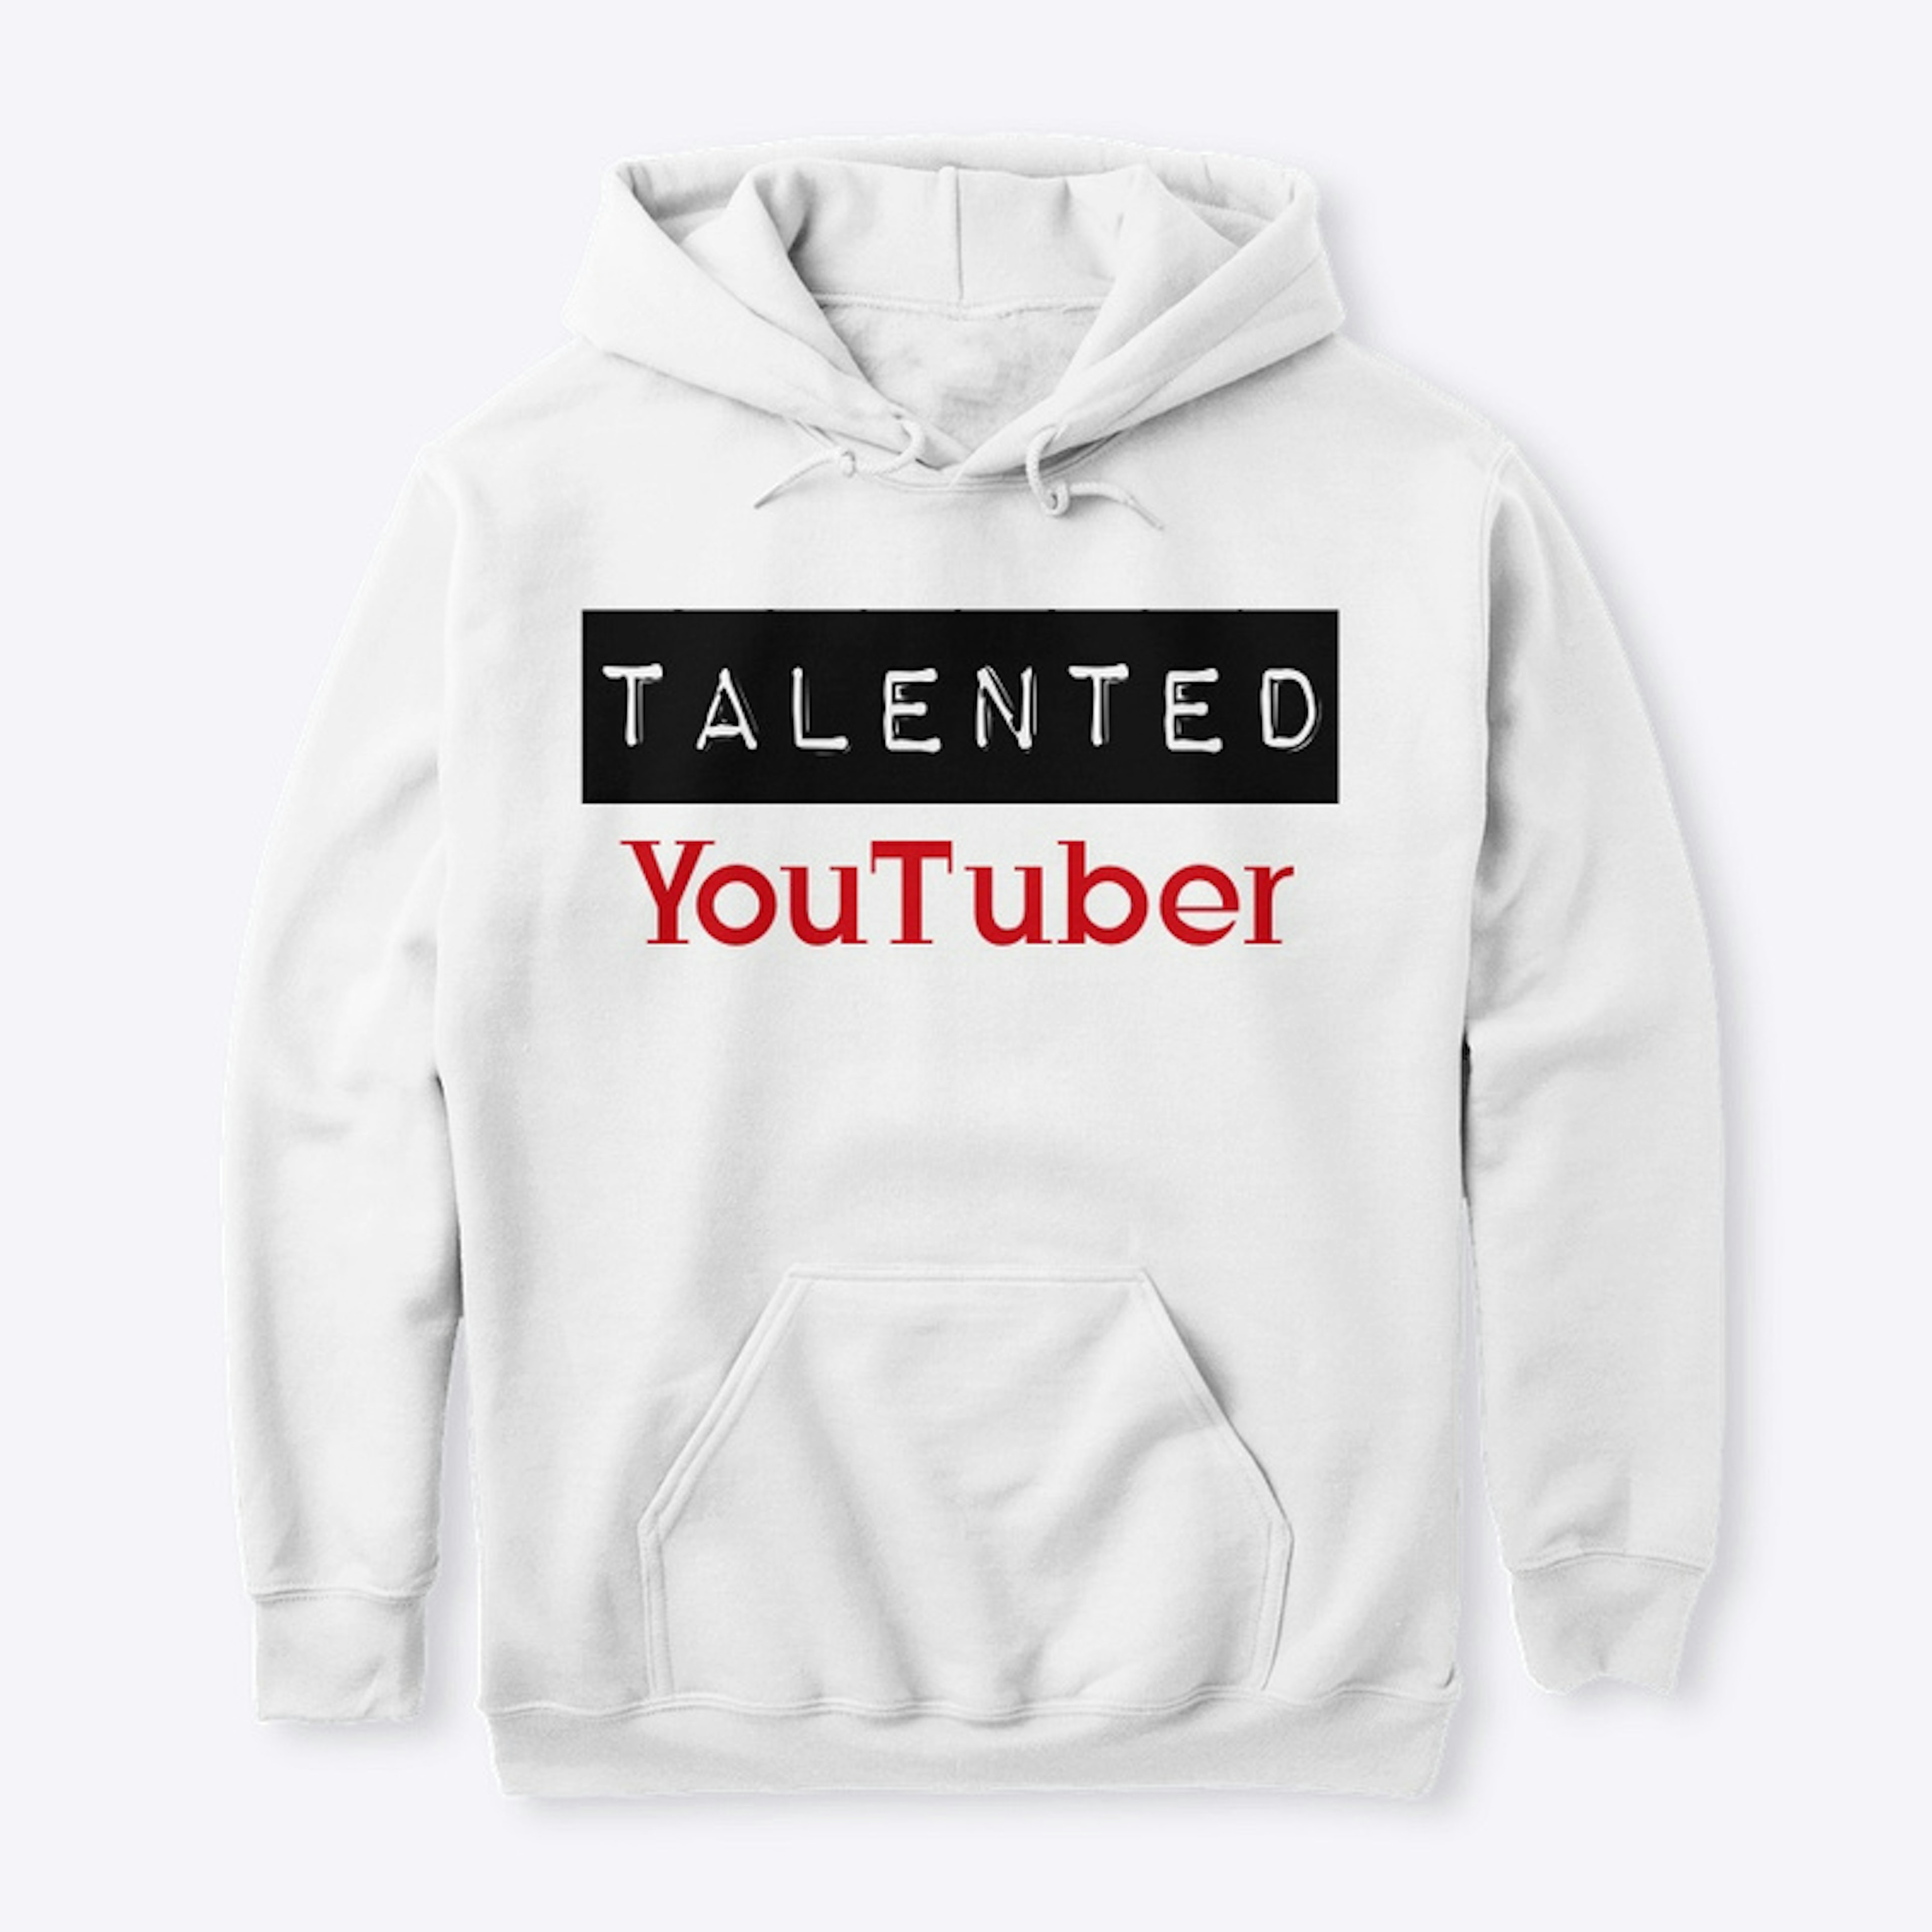 Talented YouTuber